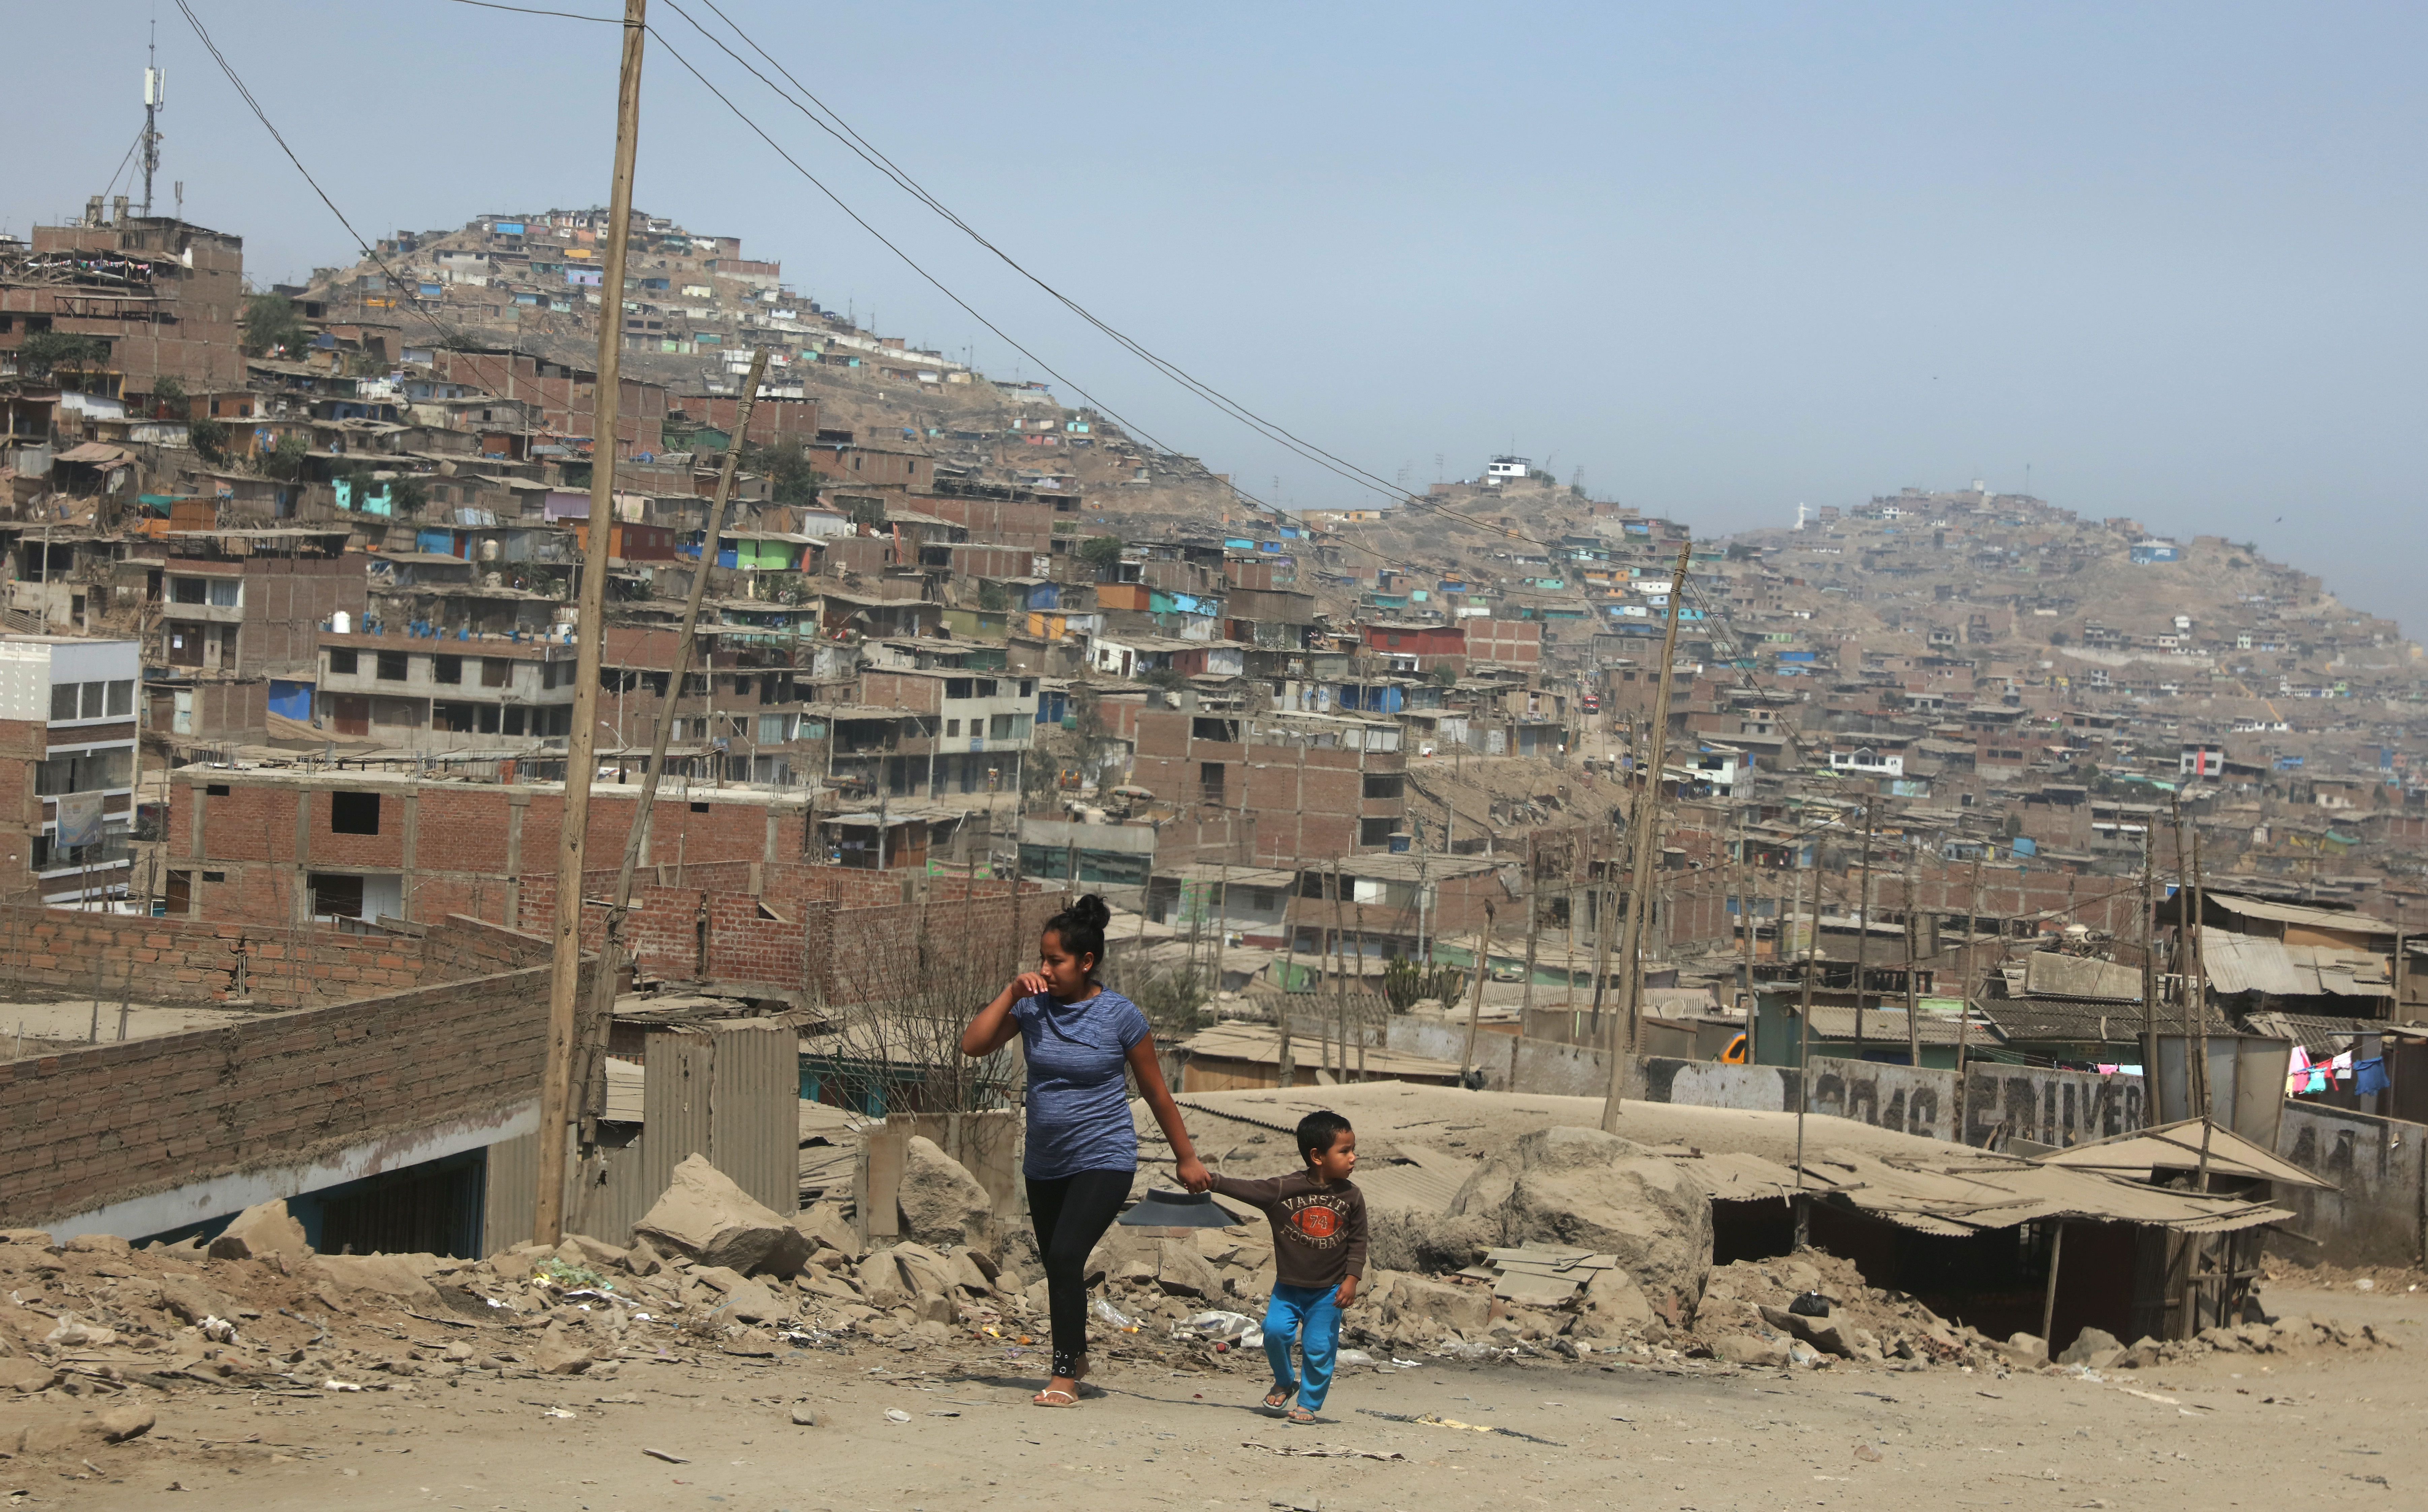 A woman and child walk on the hills  of Villa Maria del Triunfo, a shanty town on the outskirts of Lima